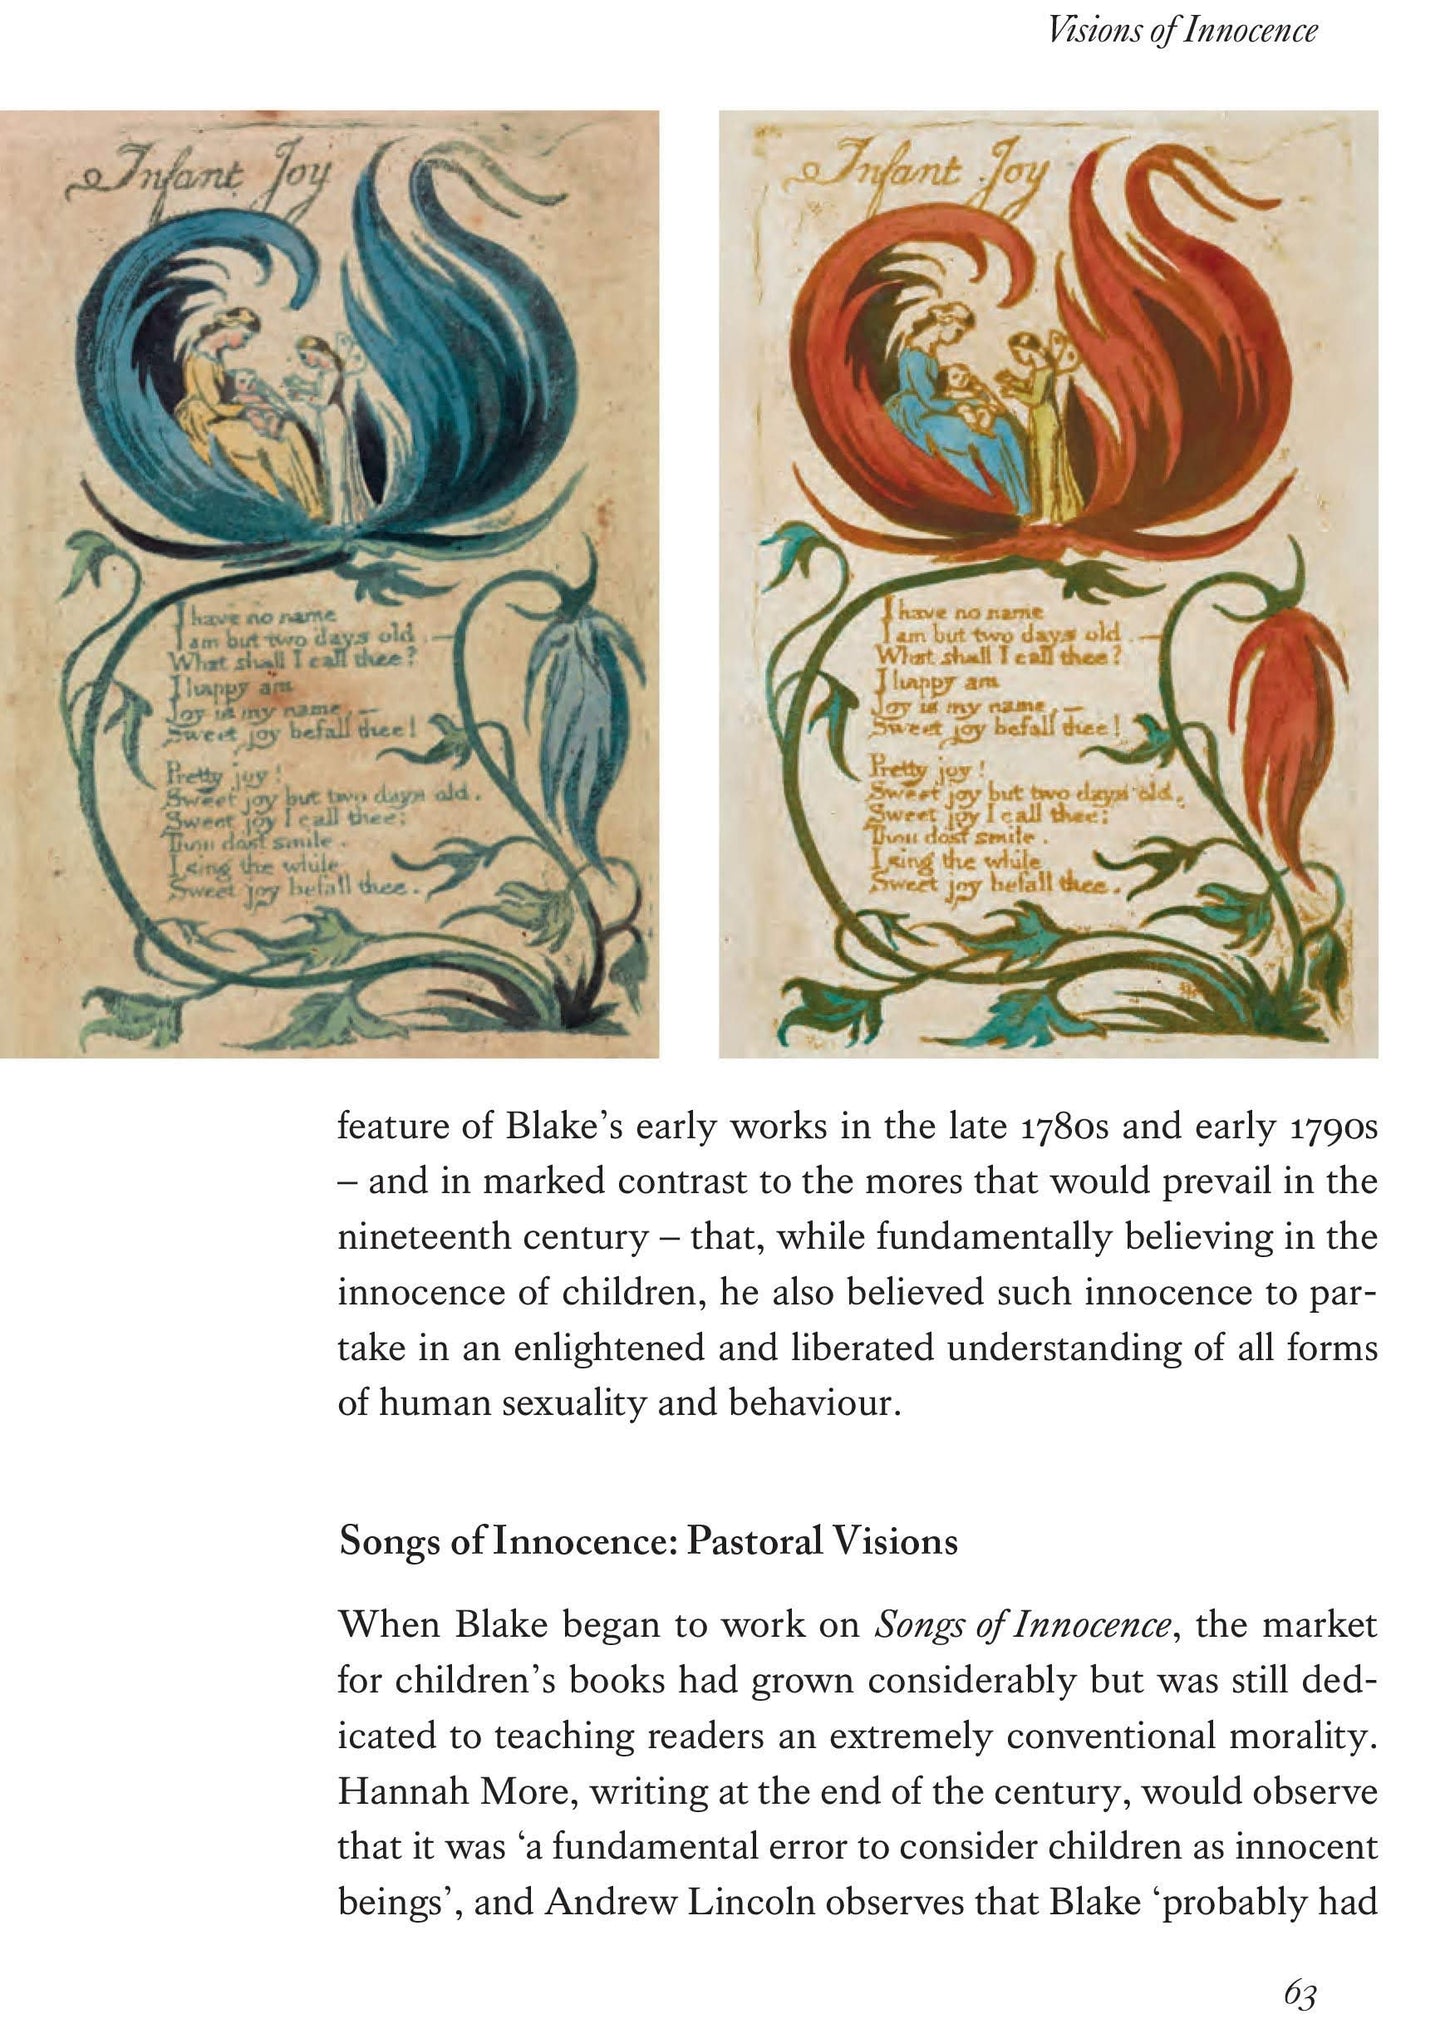 Divine Images : The Life and Work of William Blake